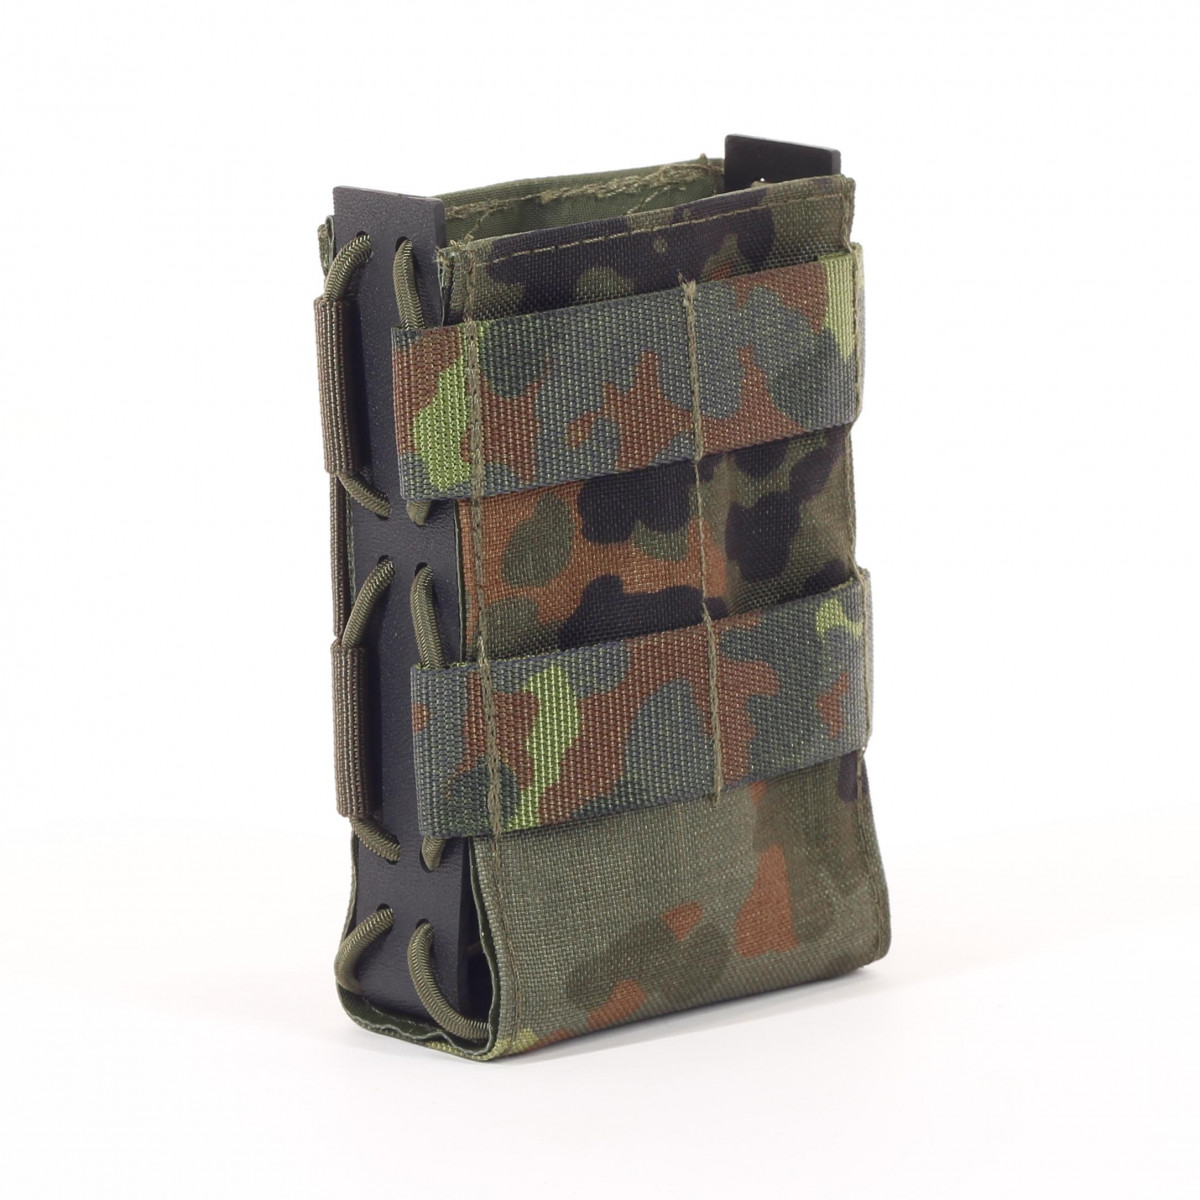 Quick-draw magazine pouch G36 short G3 in camouflage